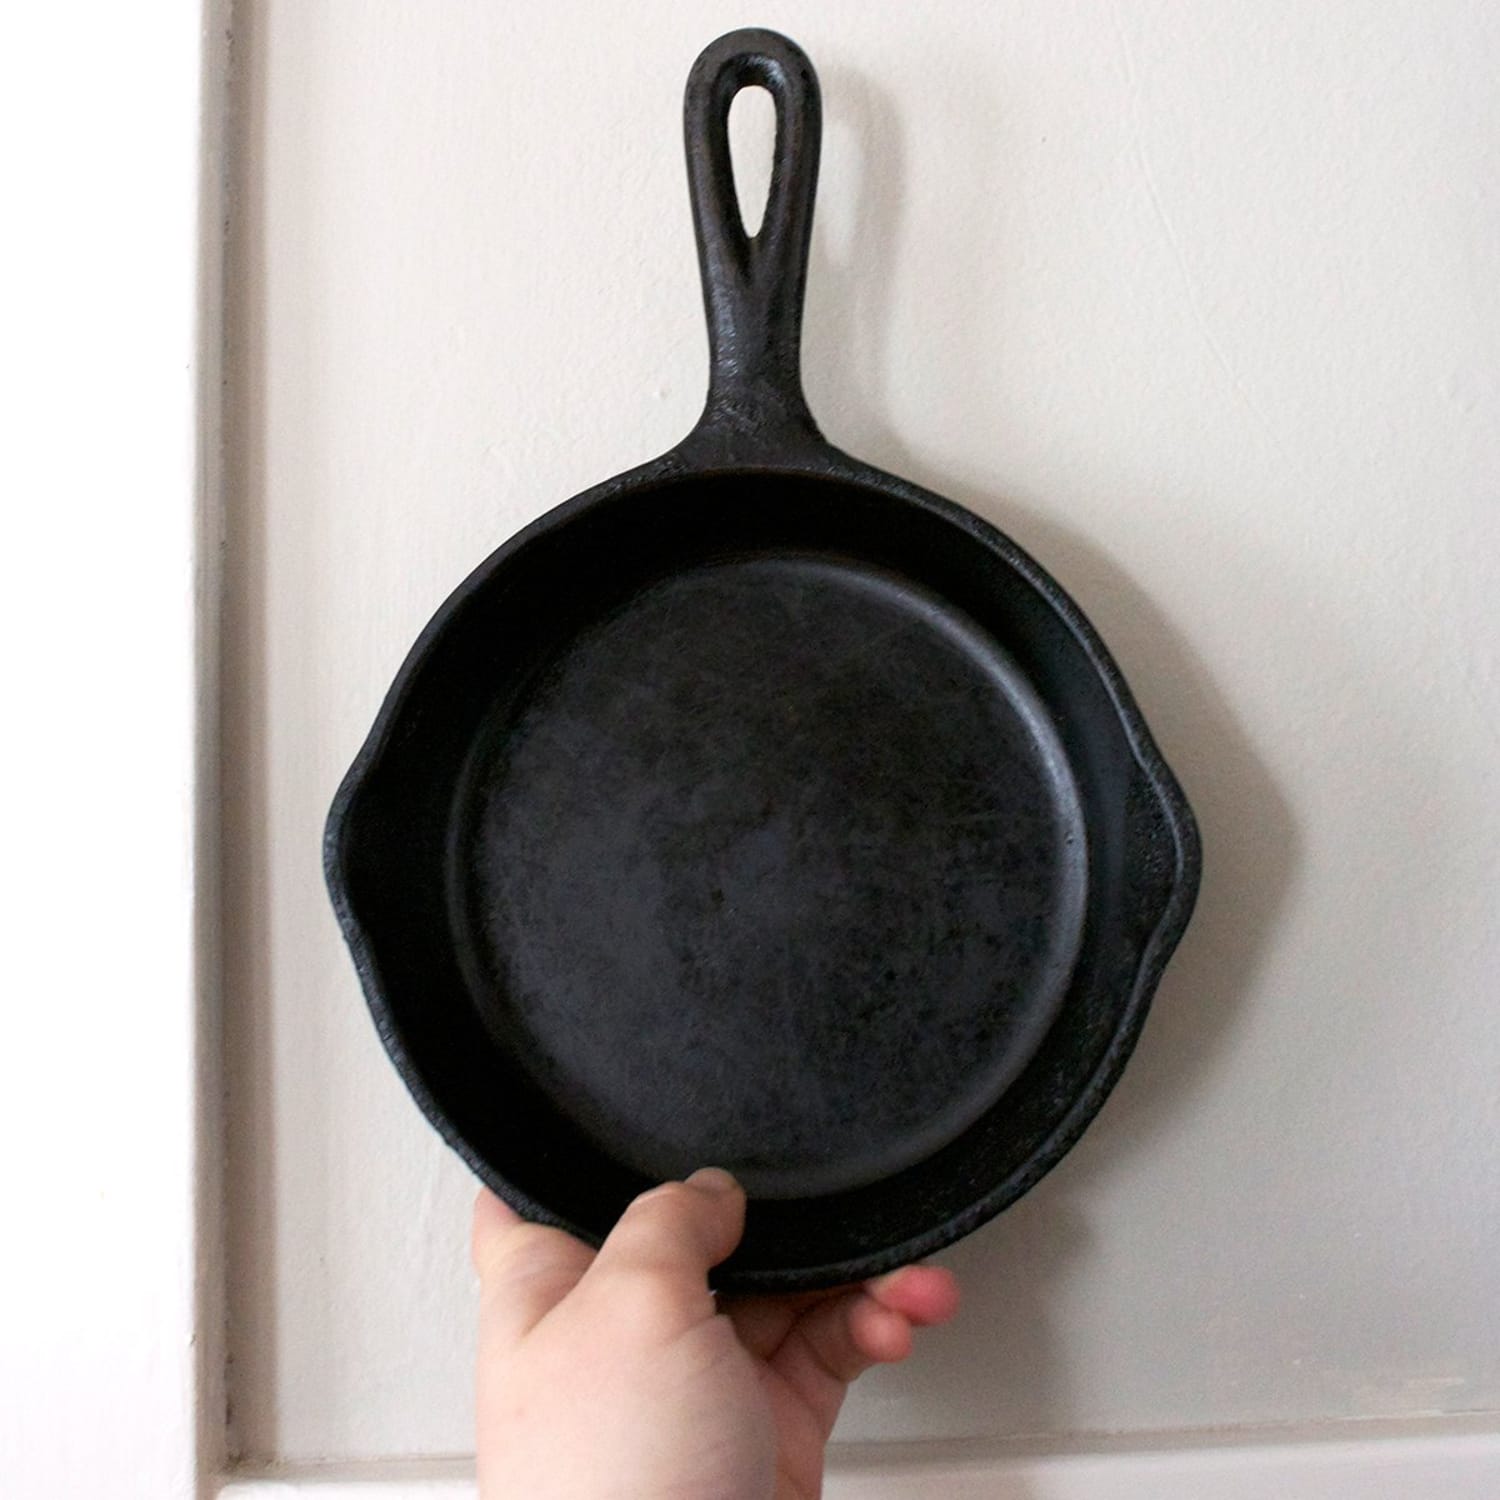 CAST IRON WALL - How to hang your pans 